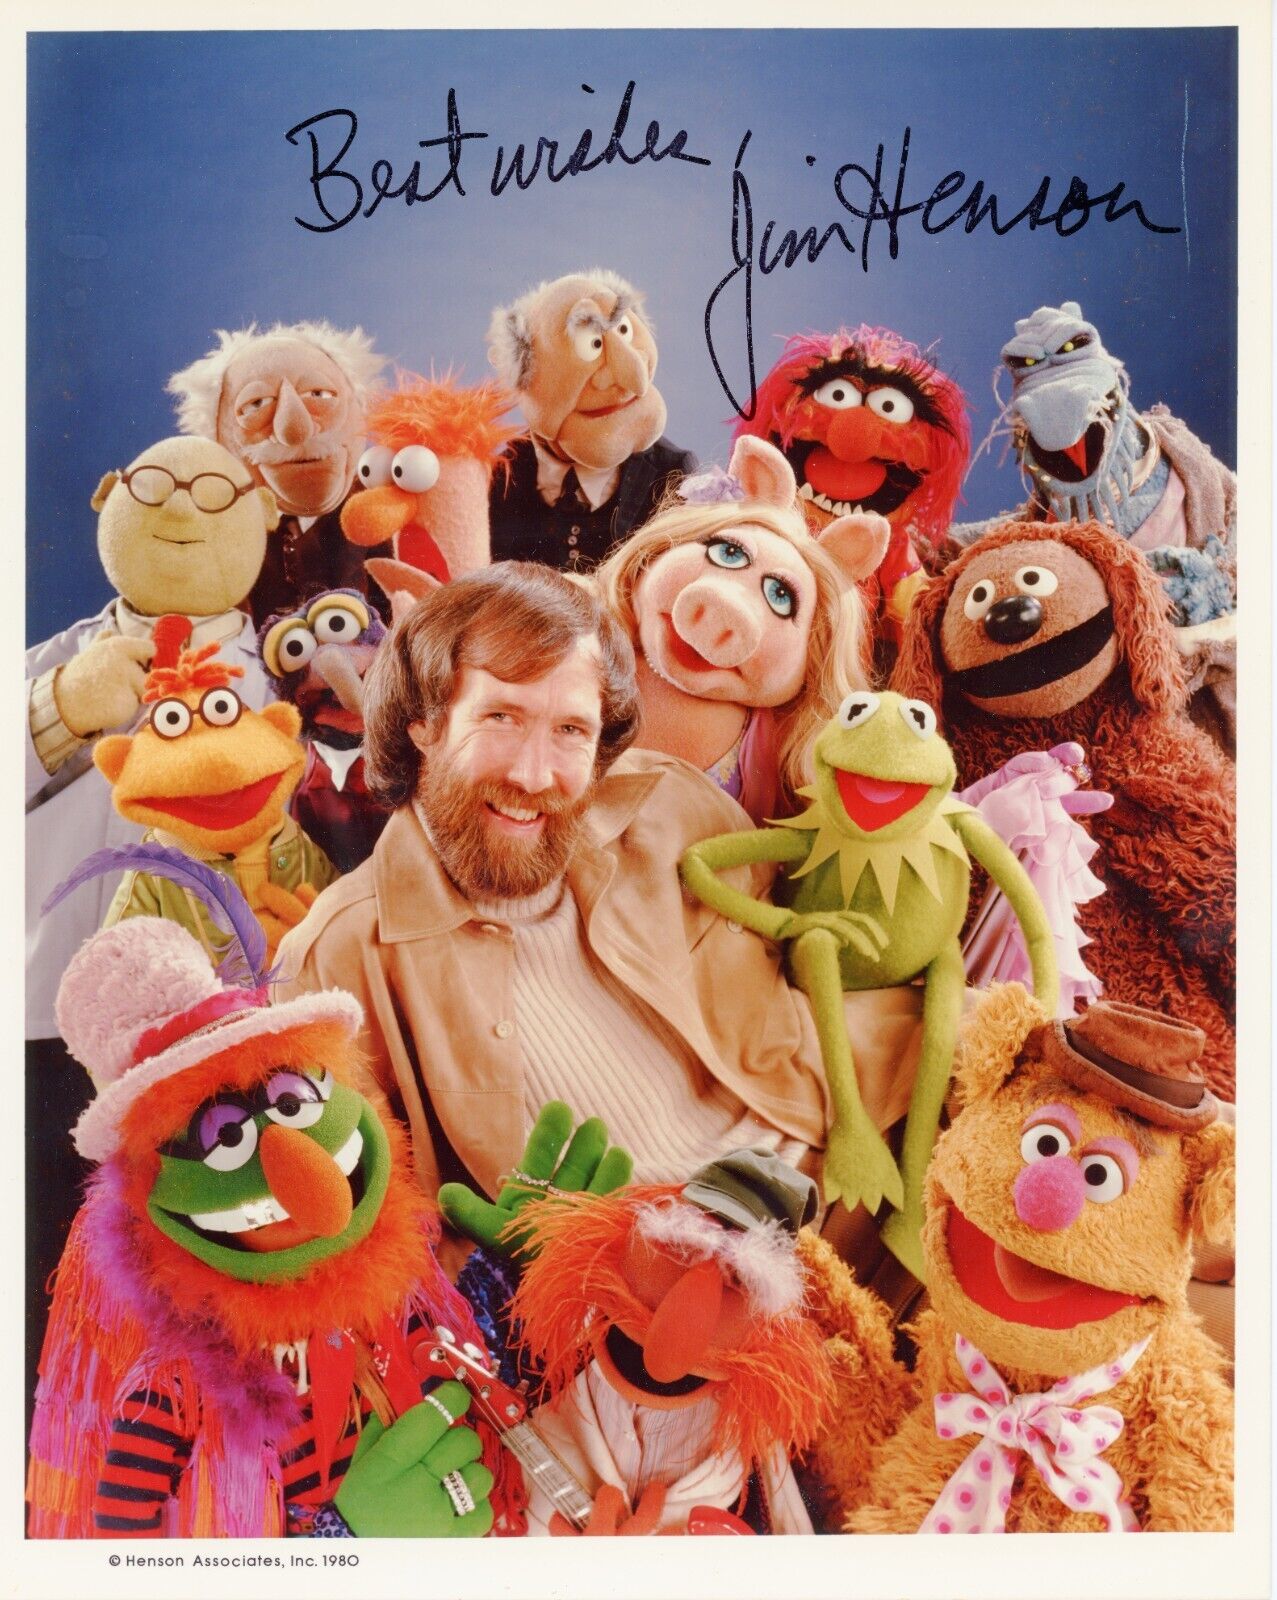 Jim Henson ~ Signed Autographed The Muppets Photo ~ PSA DNA